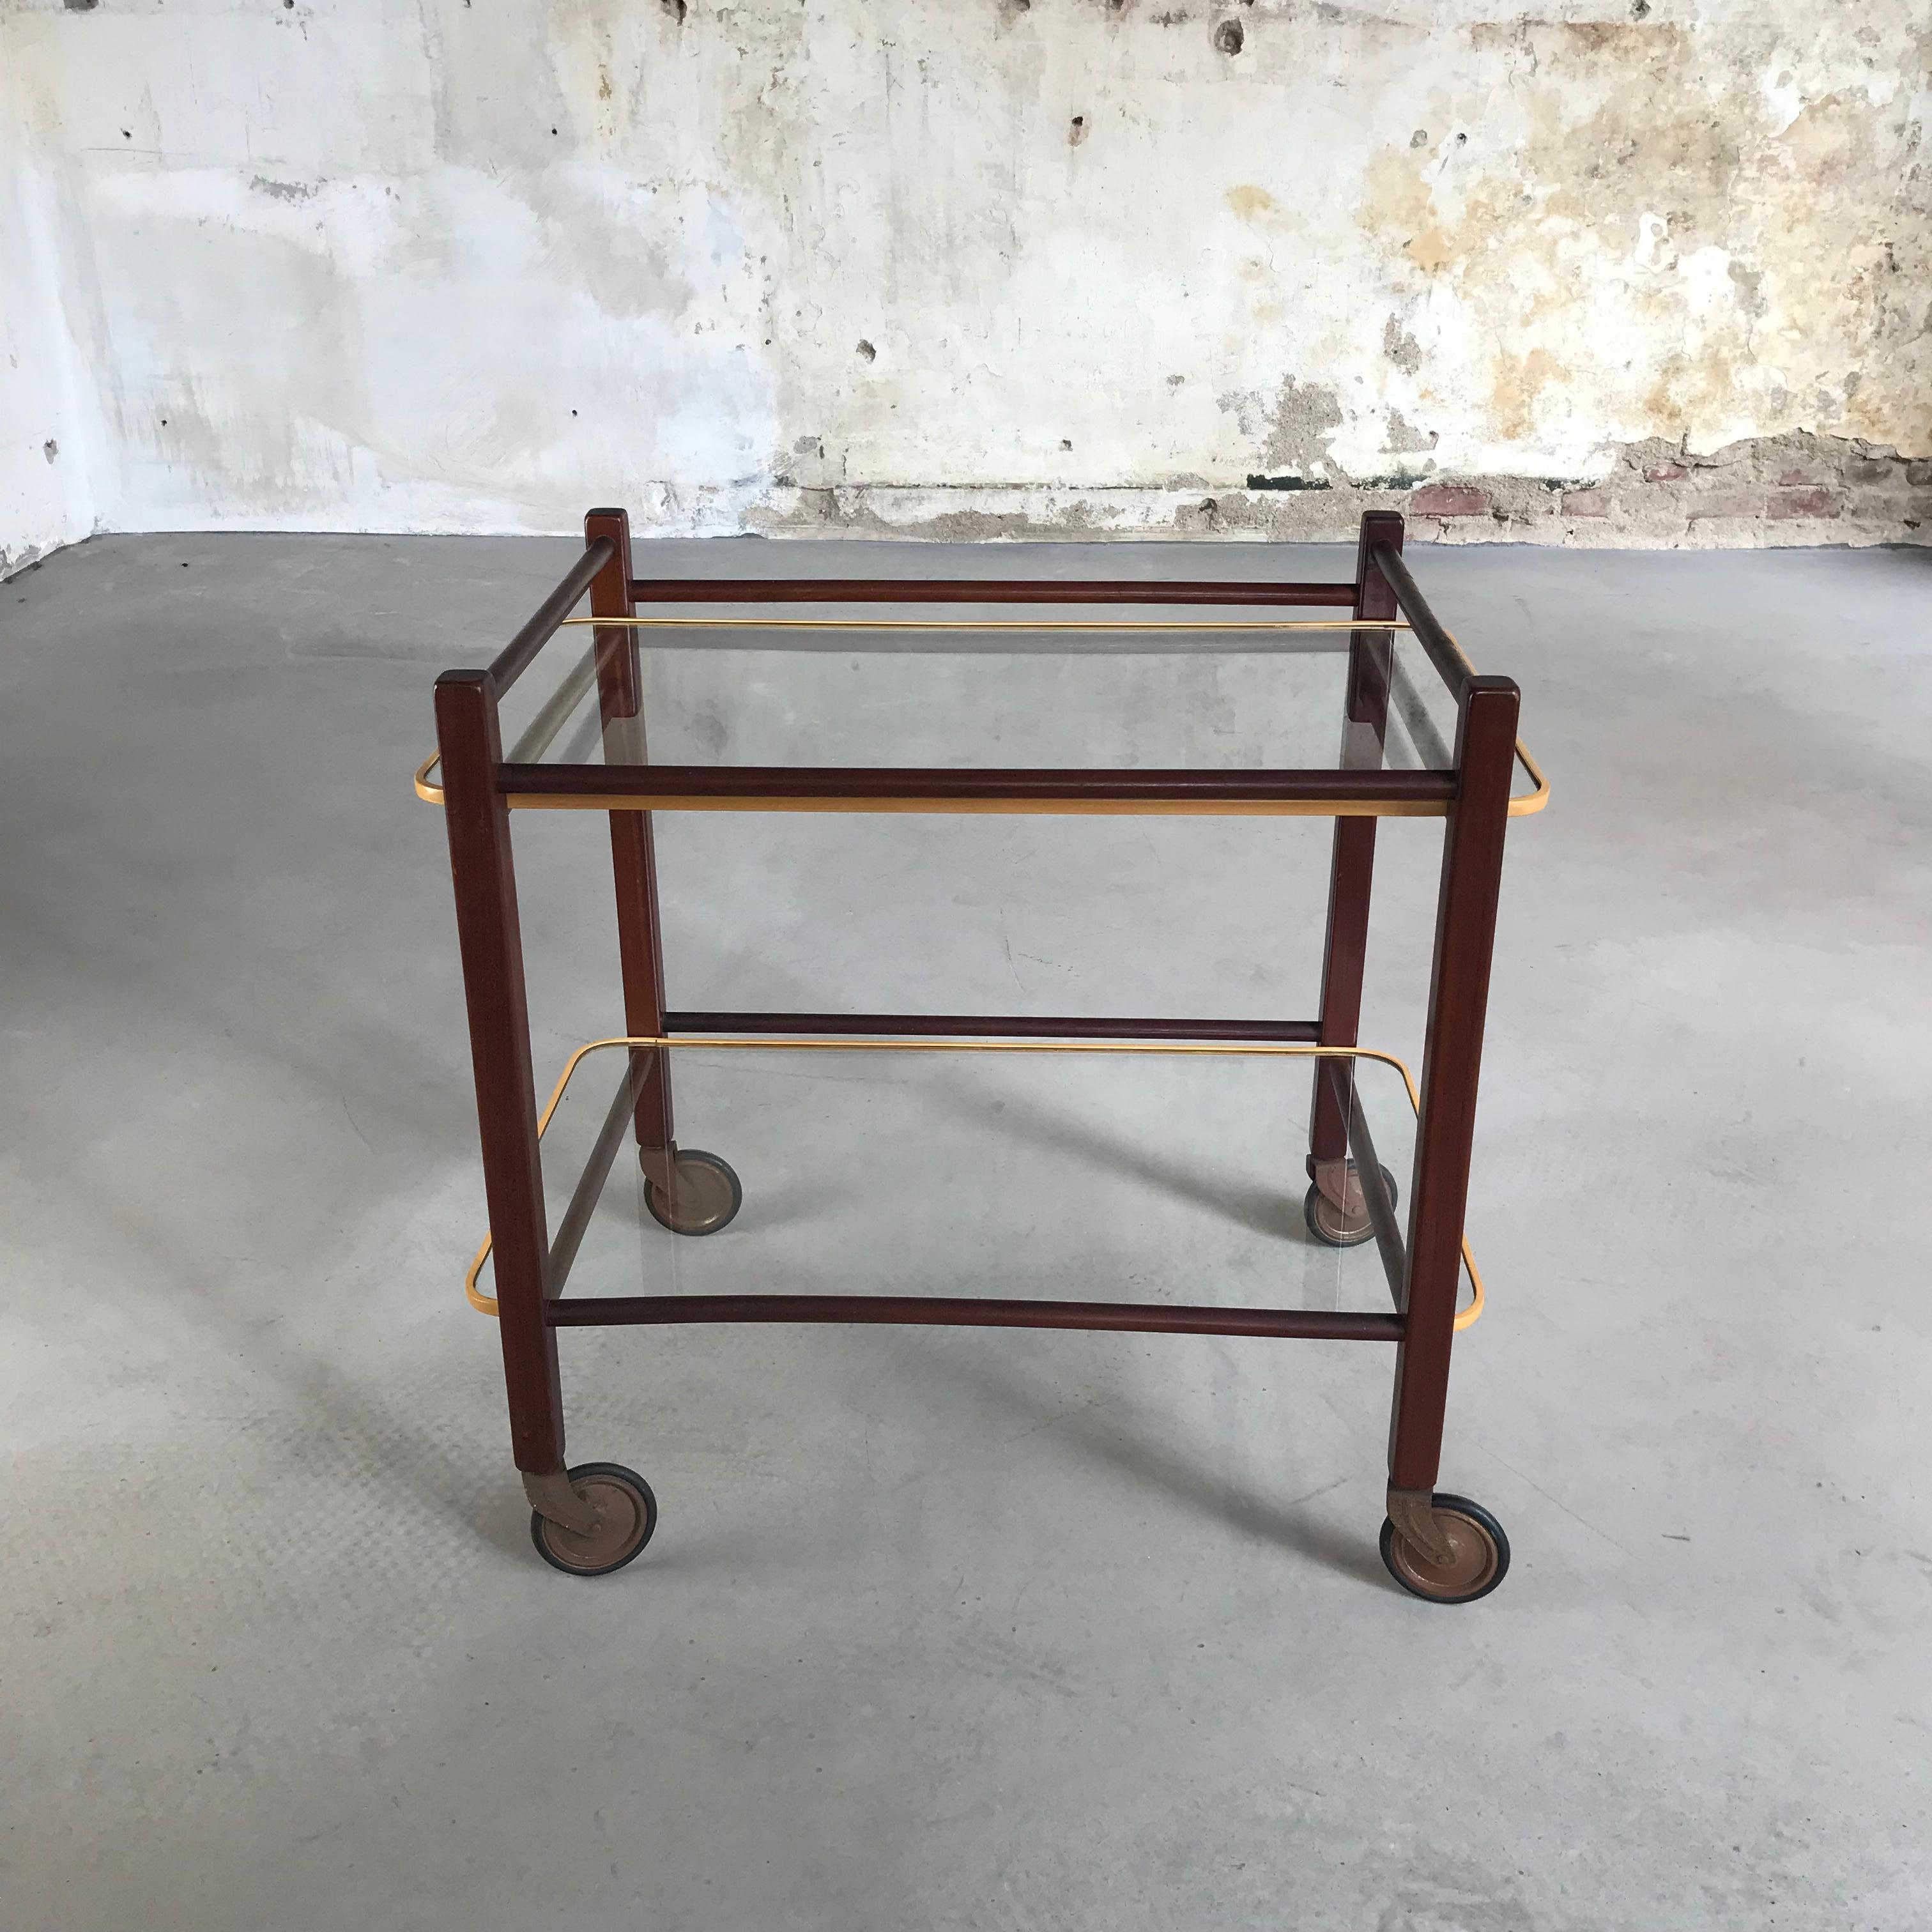 Beautiful serving trolley in totally original state. Designed by Cees Braakman and produced by UMS Pastoe in 1950s. The trolley has a solid teak frame and glass plates with original rubber protection, one of the first series. The beautiful teak